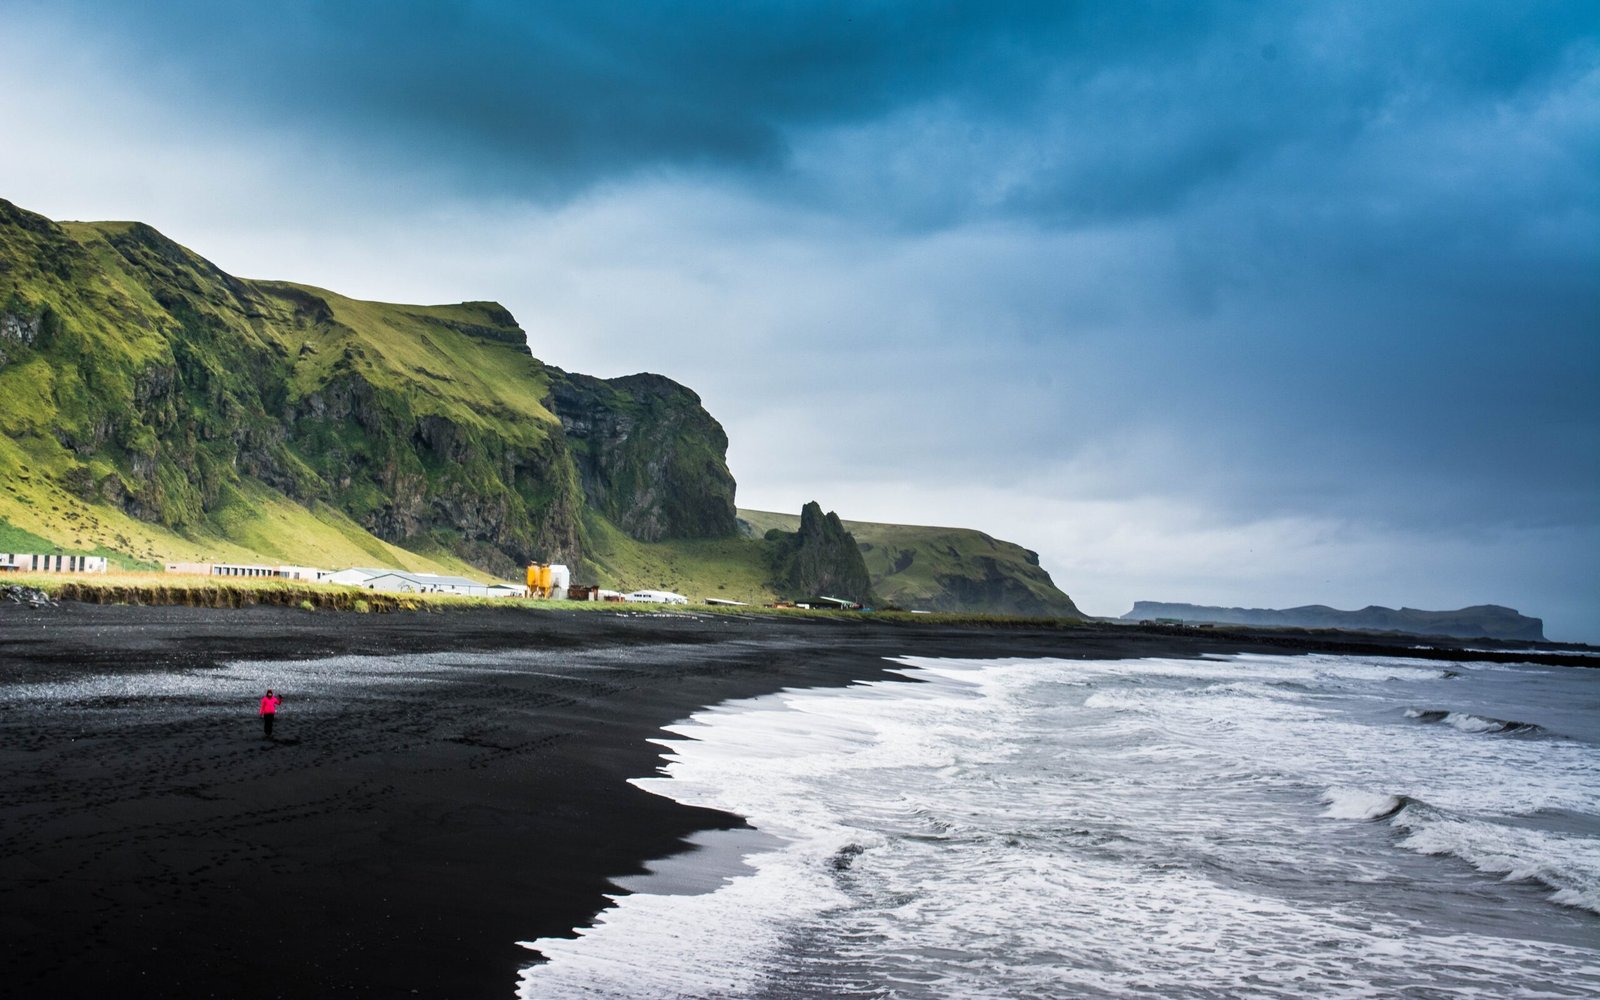 the black sand beaches in hawaii are comprised of ________.